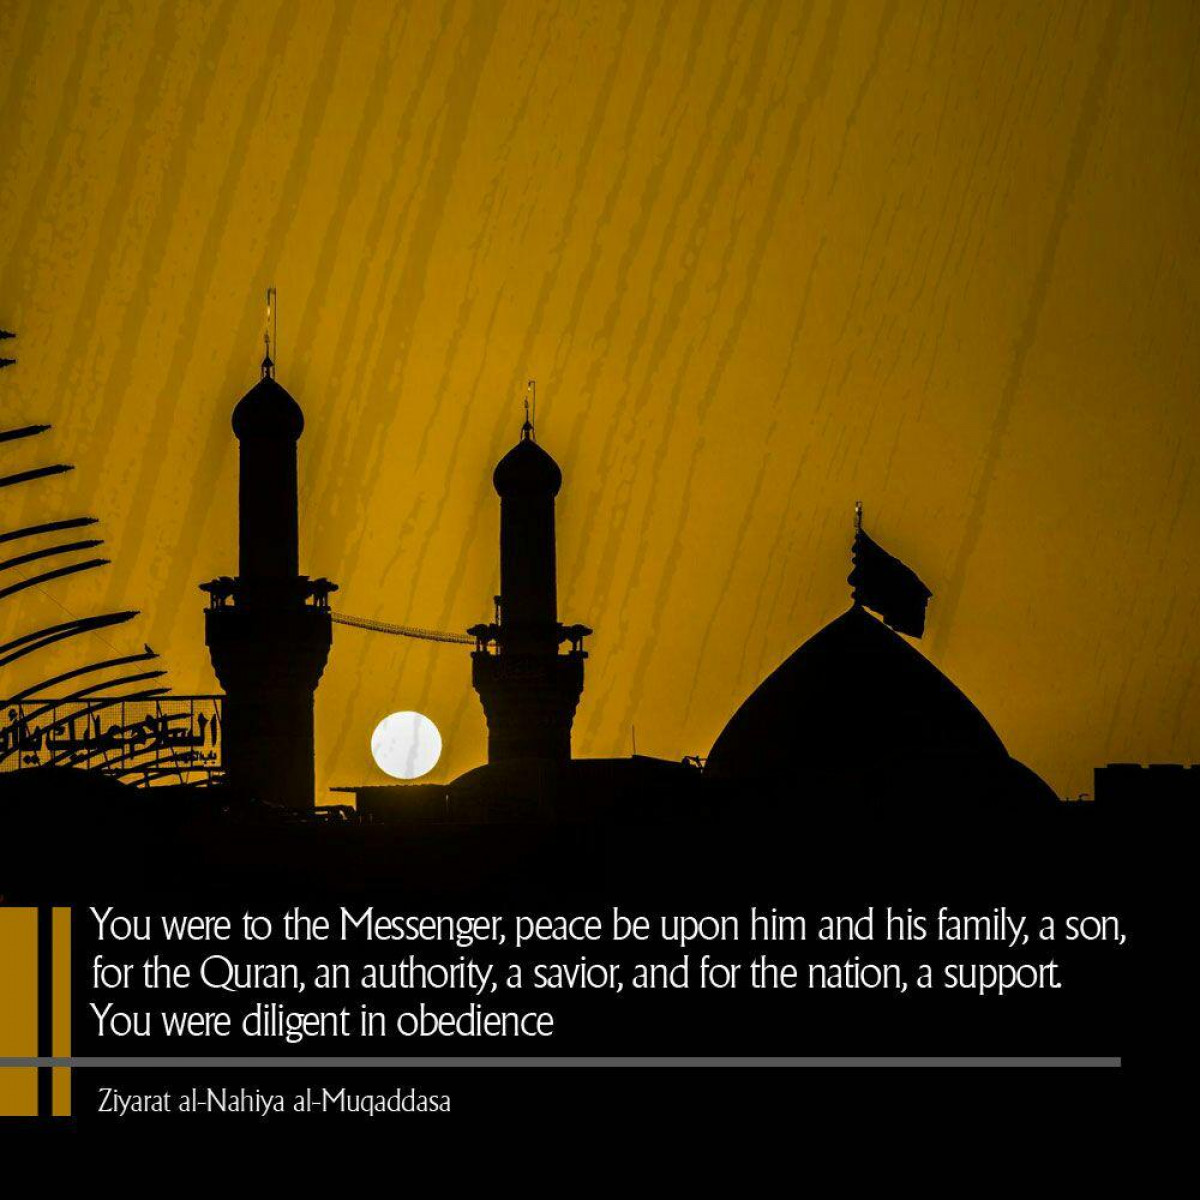 You were to the Messenger, peace be upon him and his family